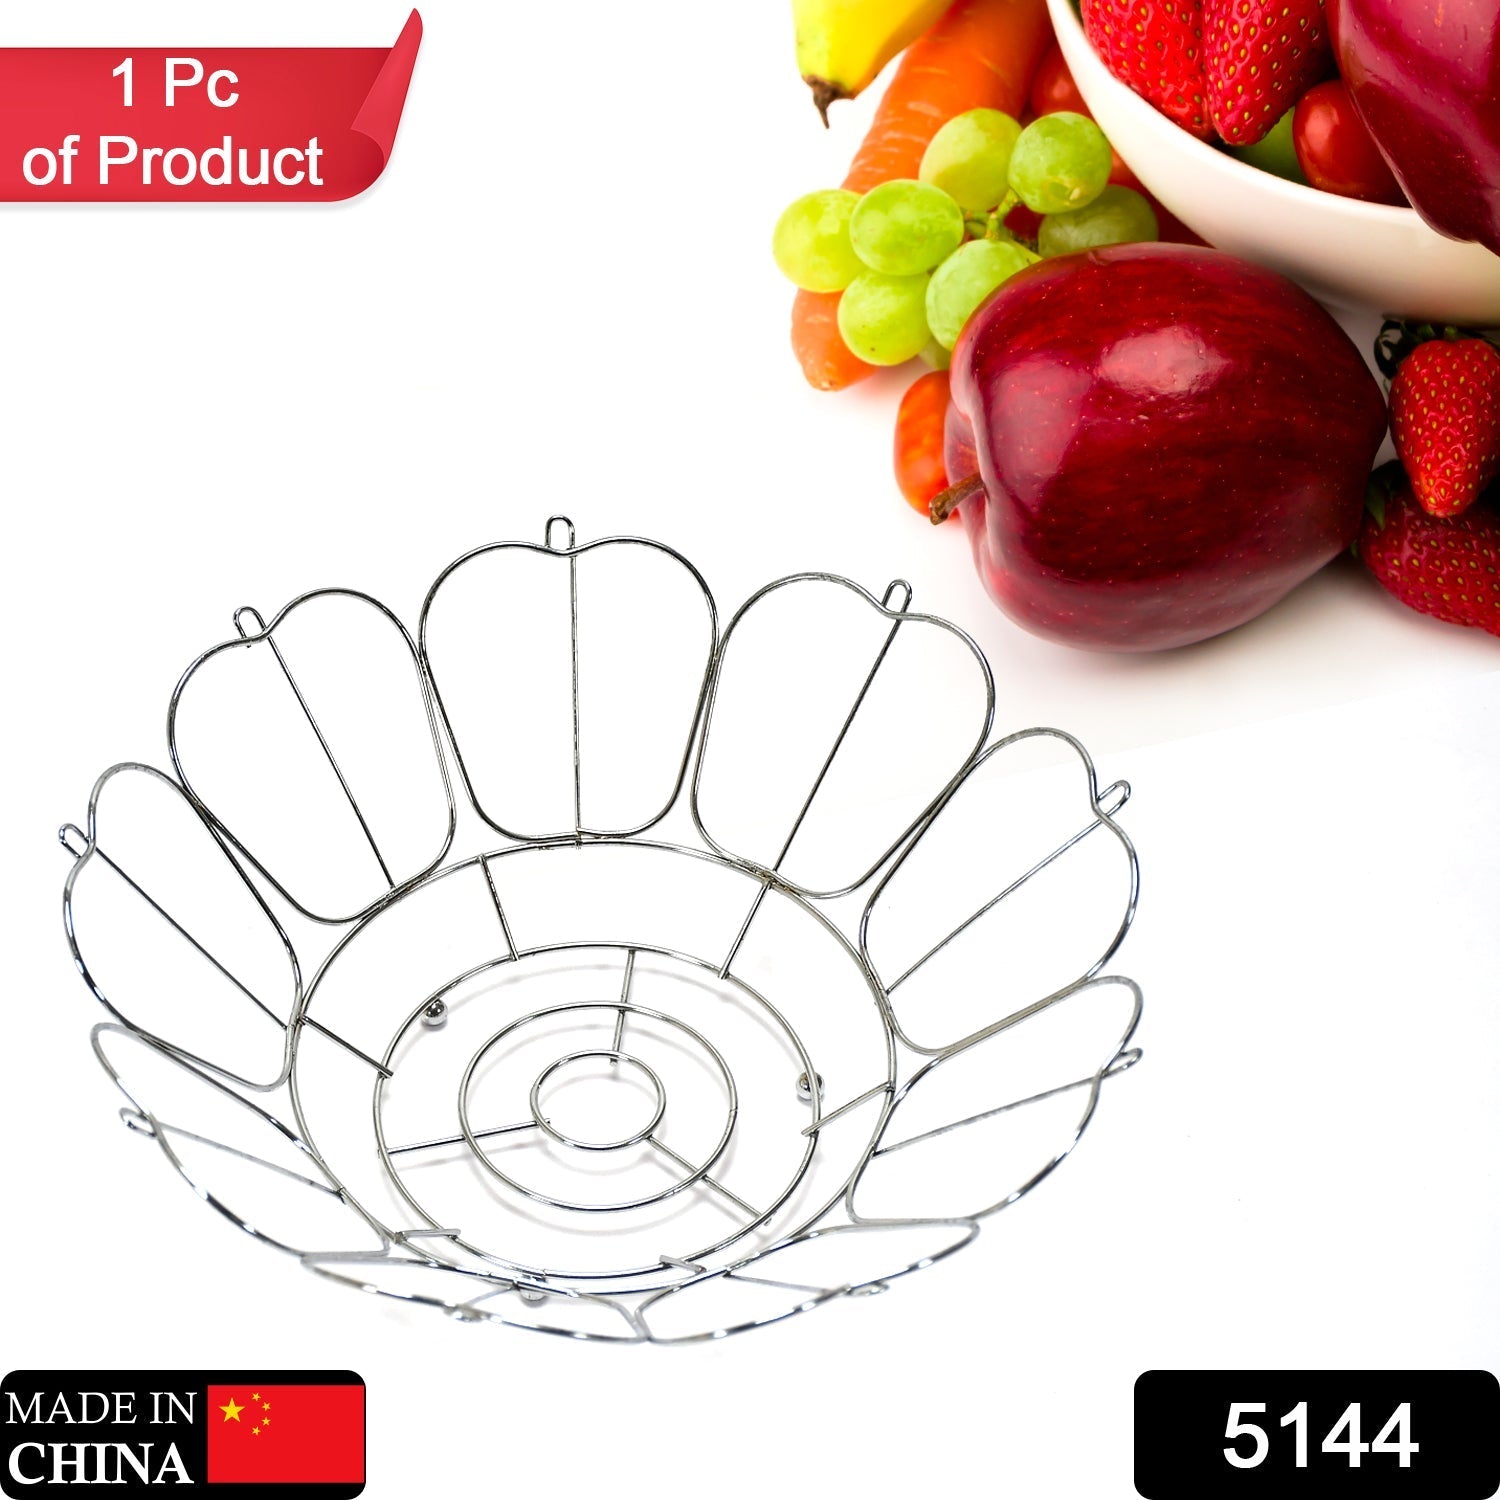 5144 Stainless Steel Folding Fruit and Vegetable Basket for Kitchen/Dining Table/Home DoeDap